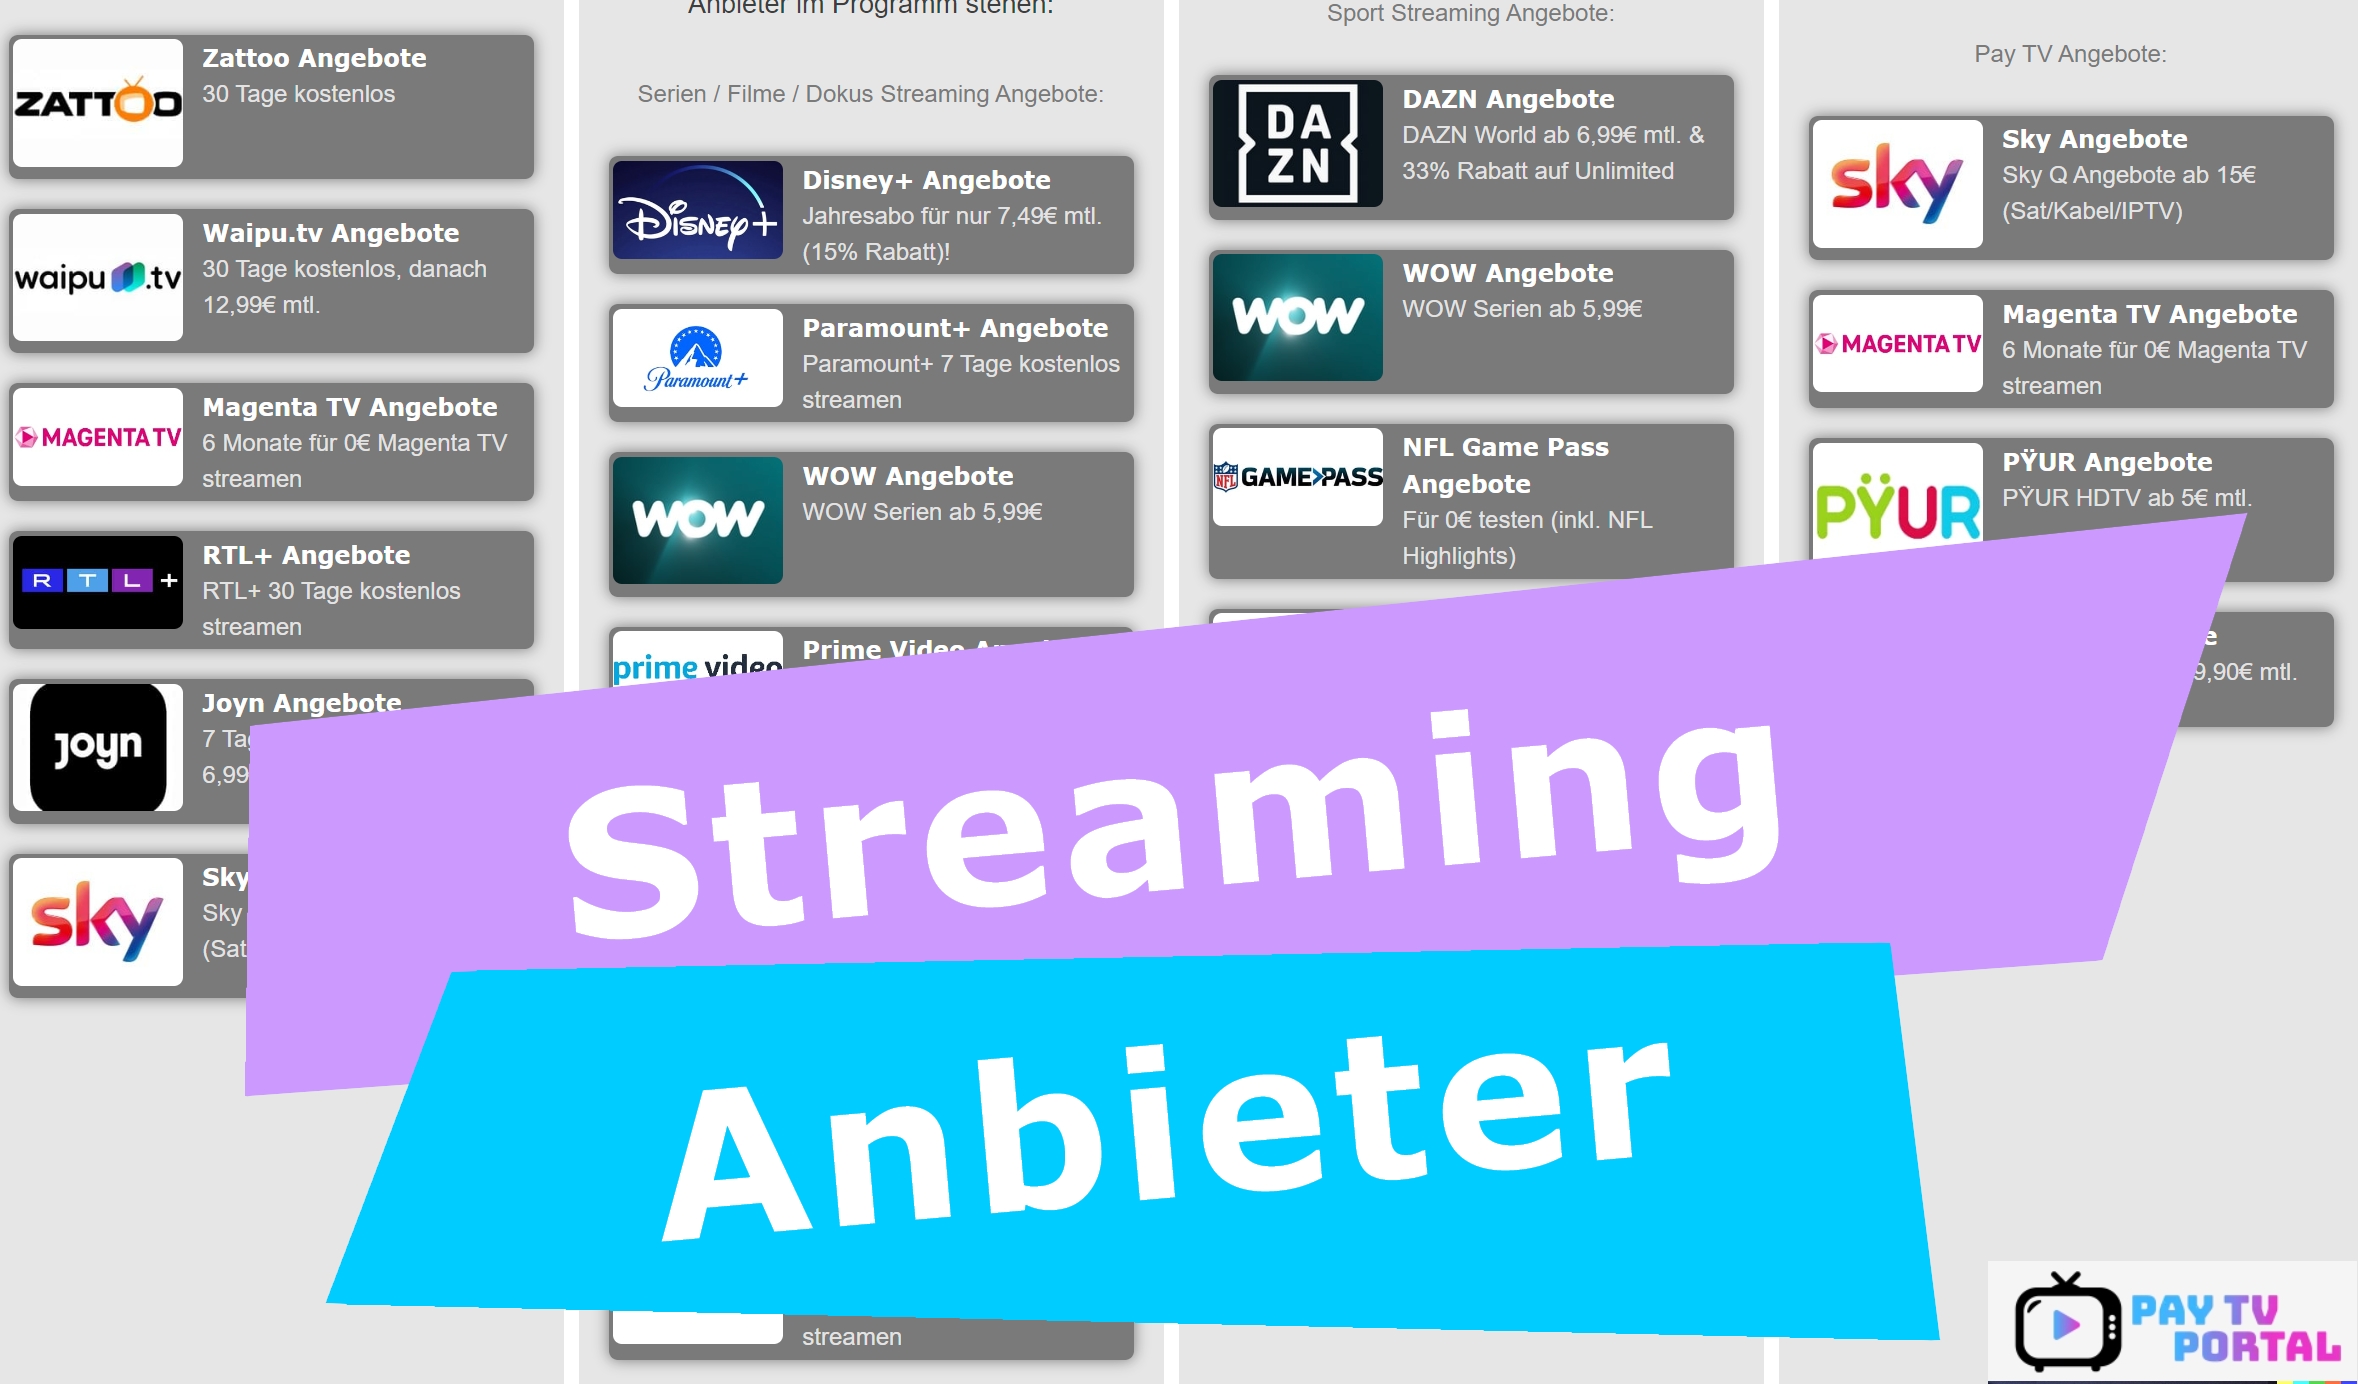 streaming-anbieter